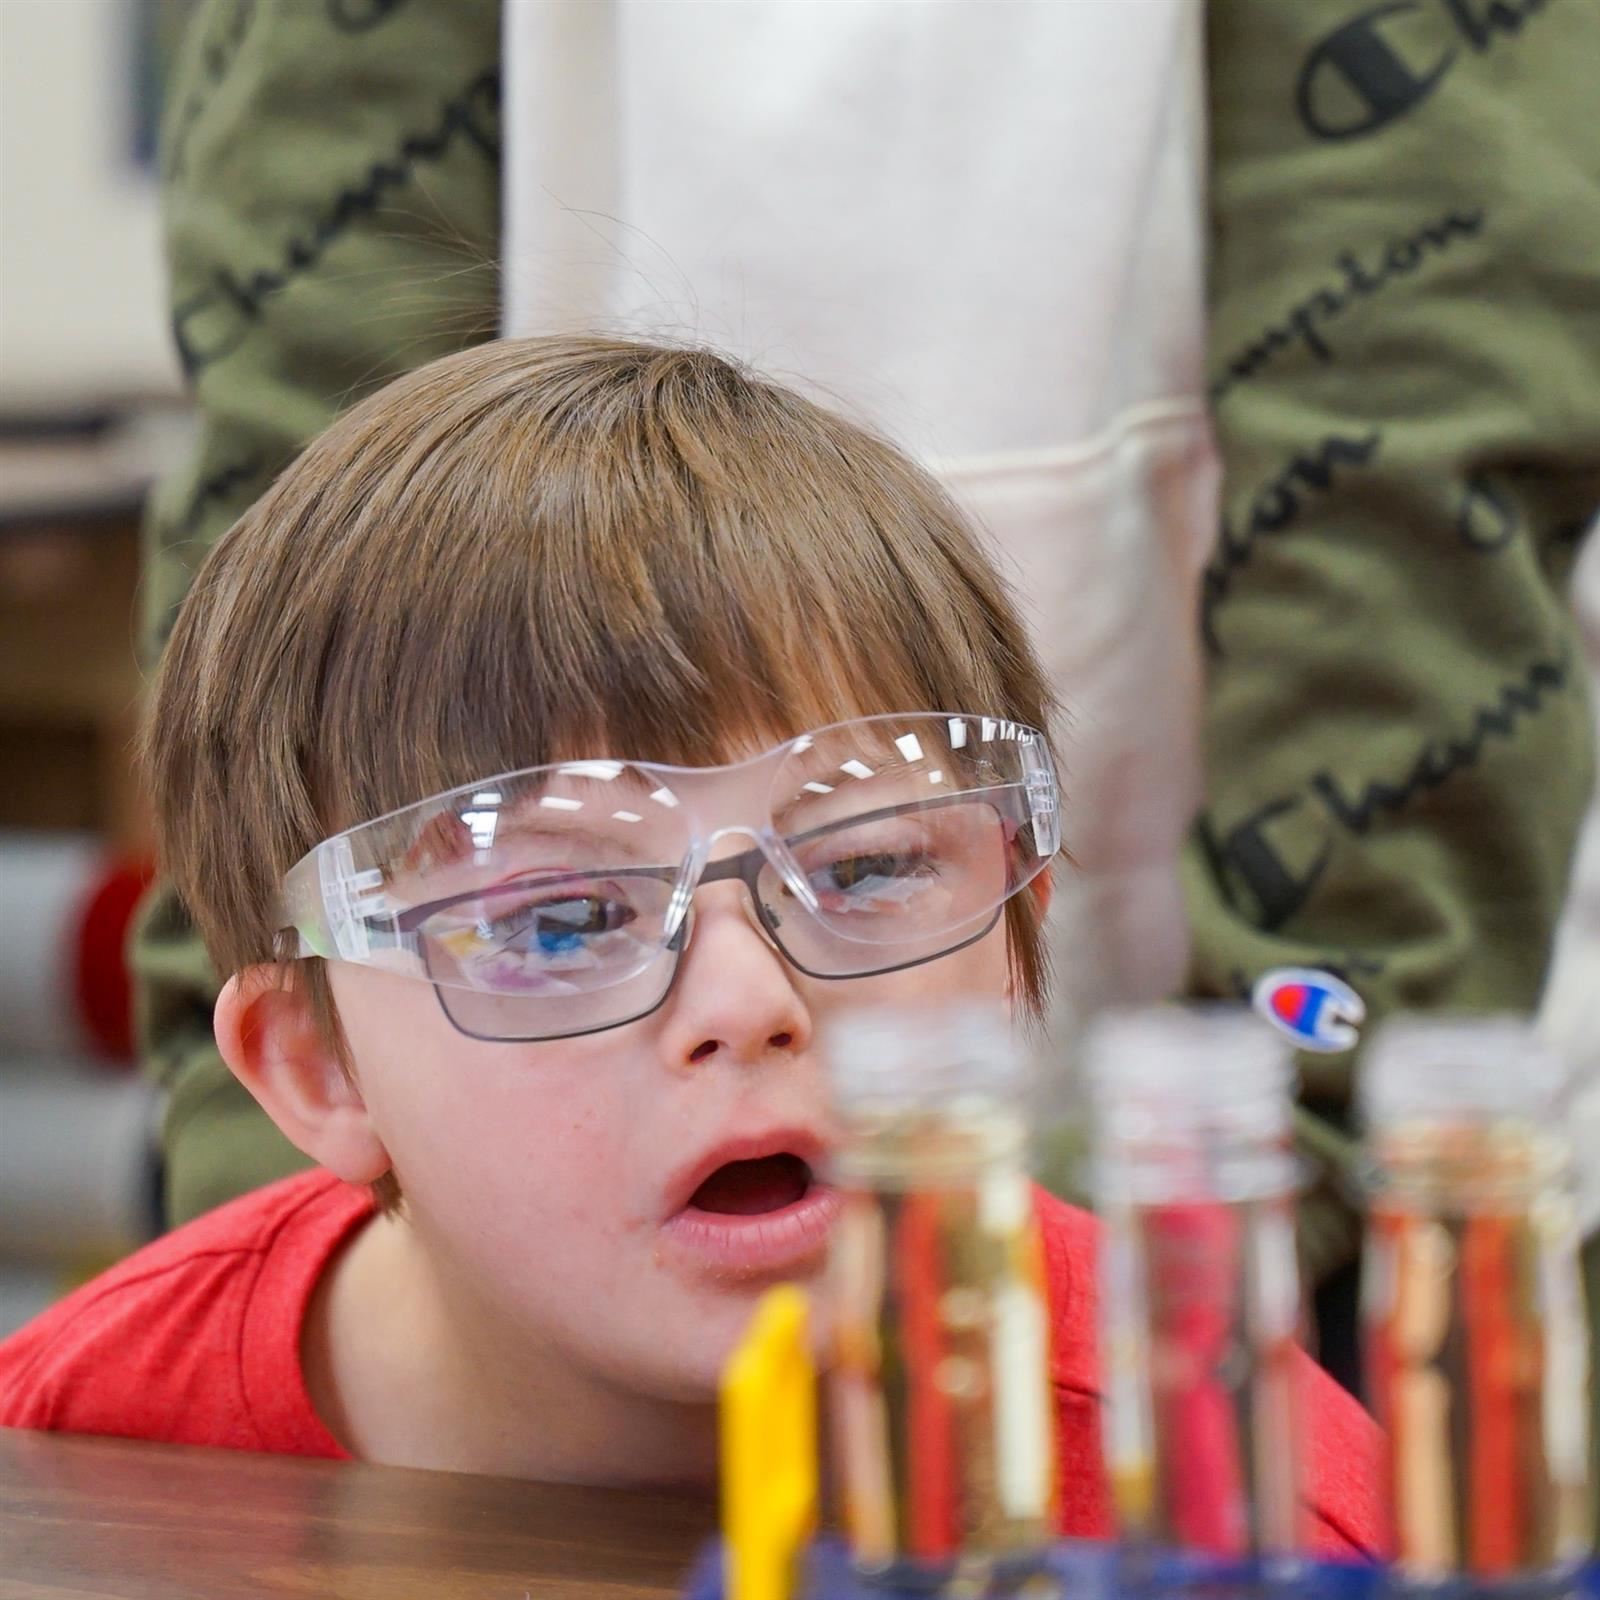 A student observing test tues during a science experiment at Mon Valley School